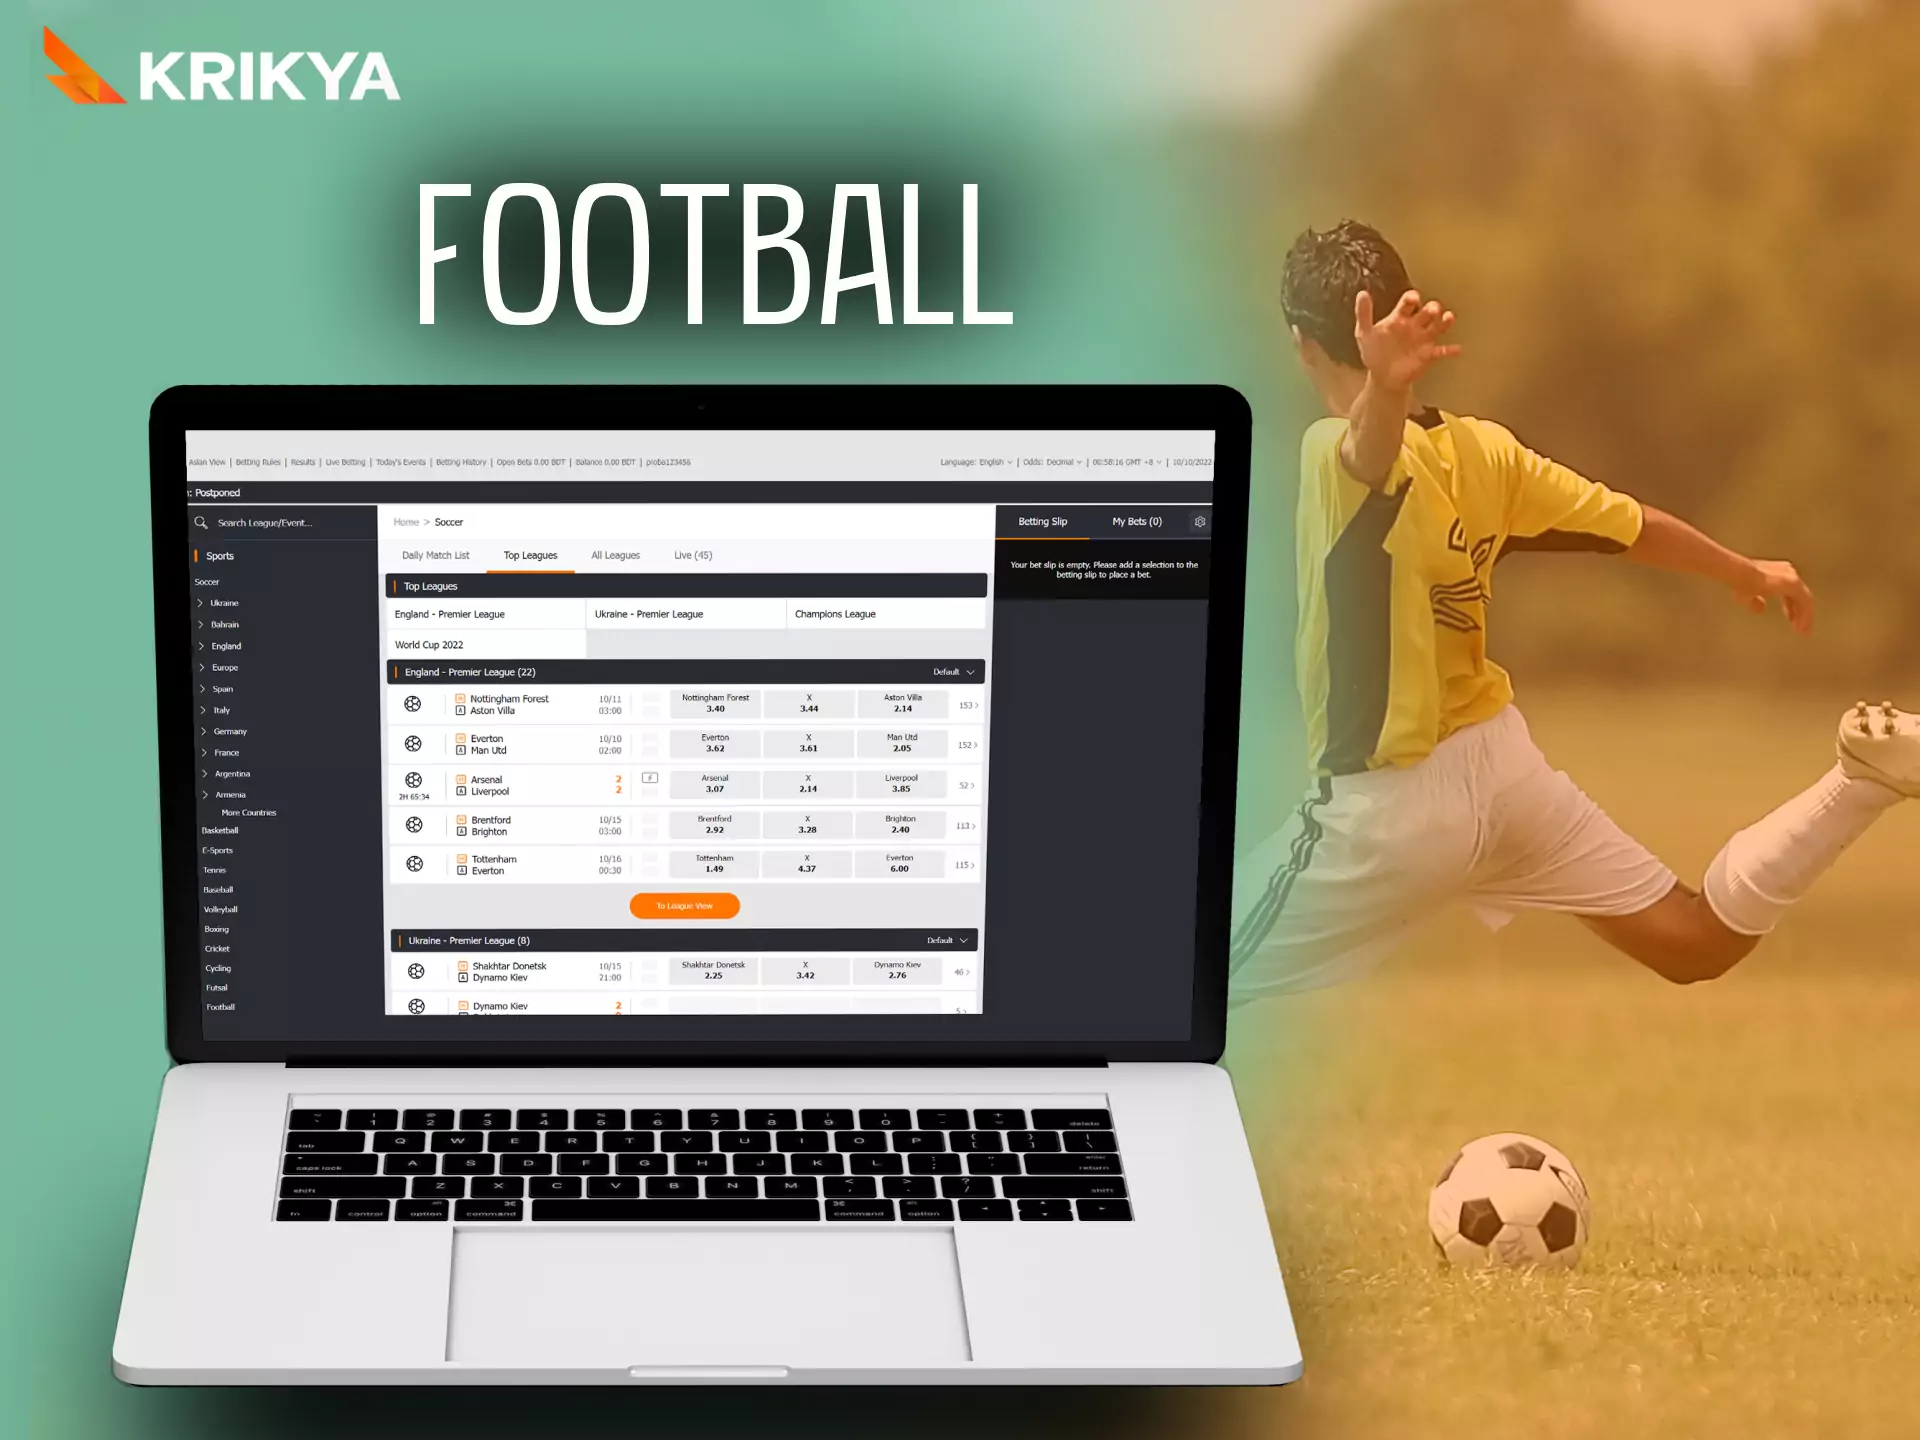 With Krikya, place bets on your favorite football teams.